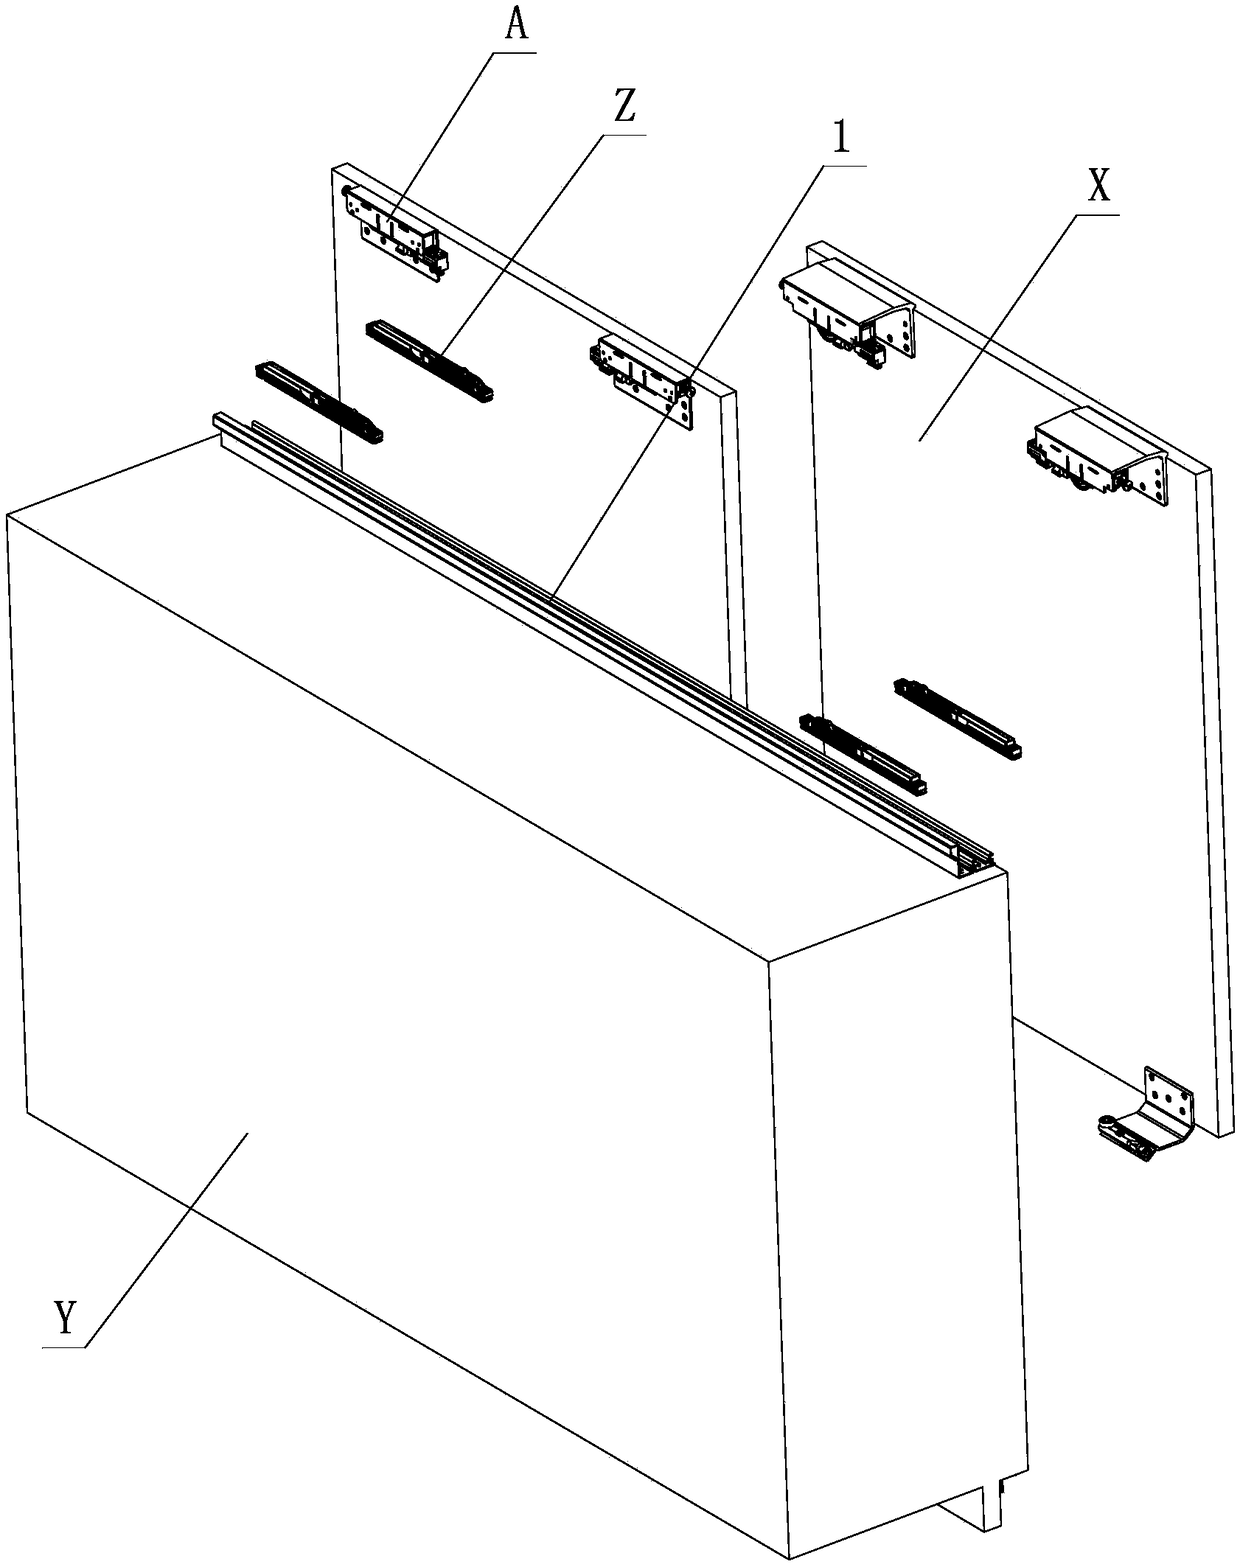 An anti-off protection mechanism for furniture sliding doors